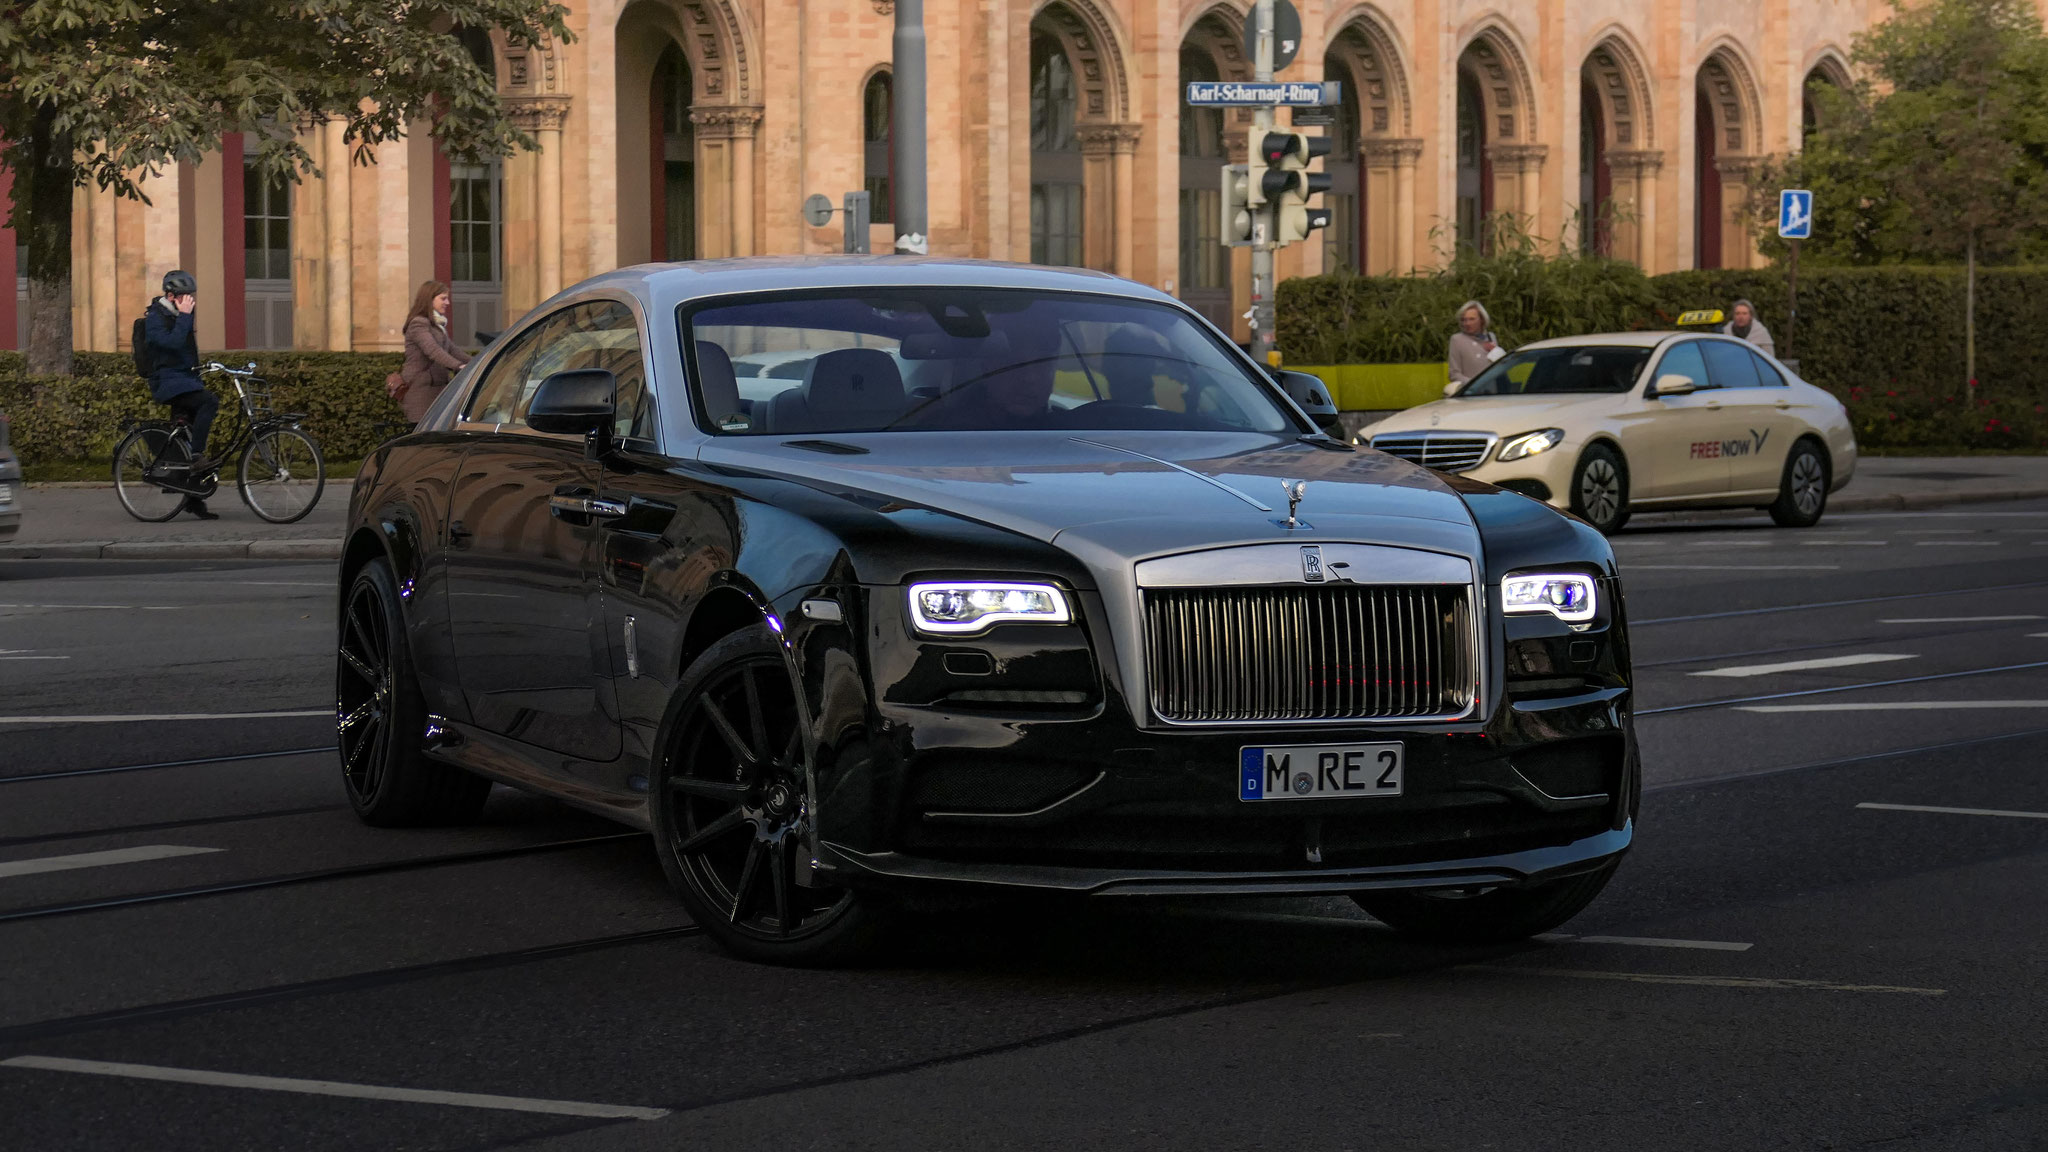 Rolls Royce Wraith Ares - M-RE-2